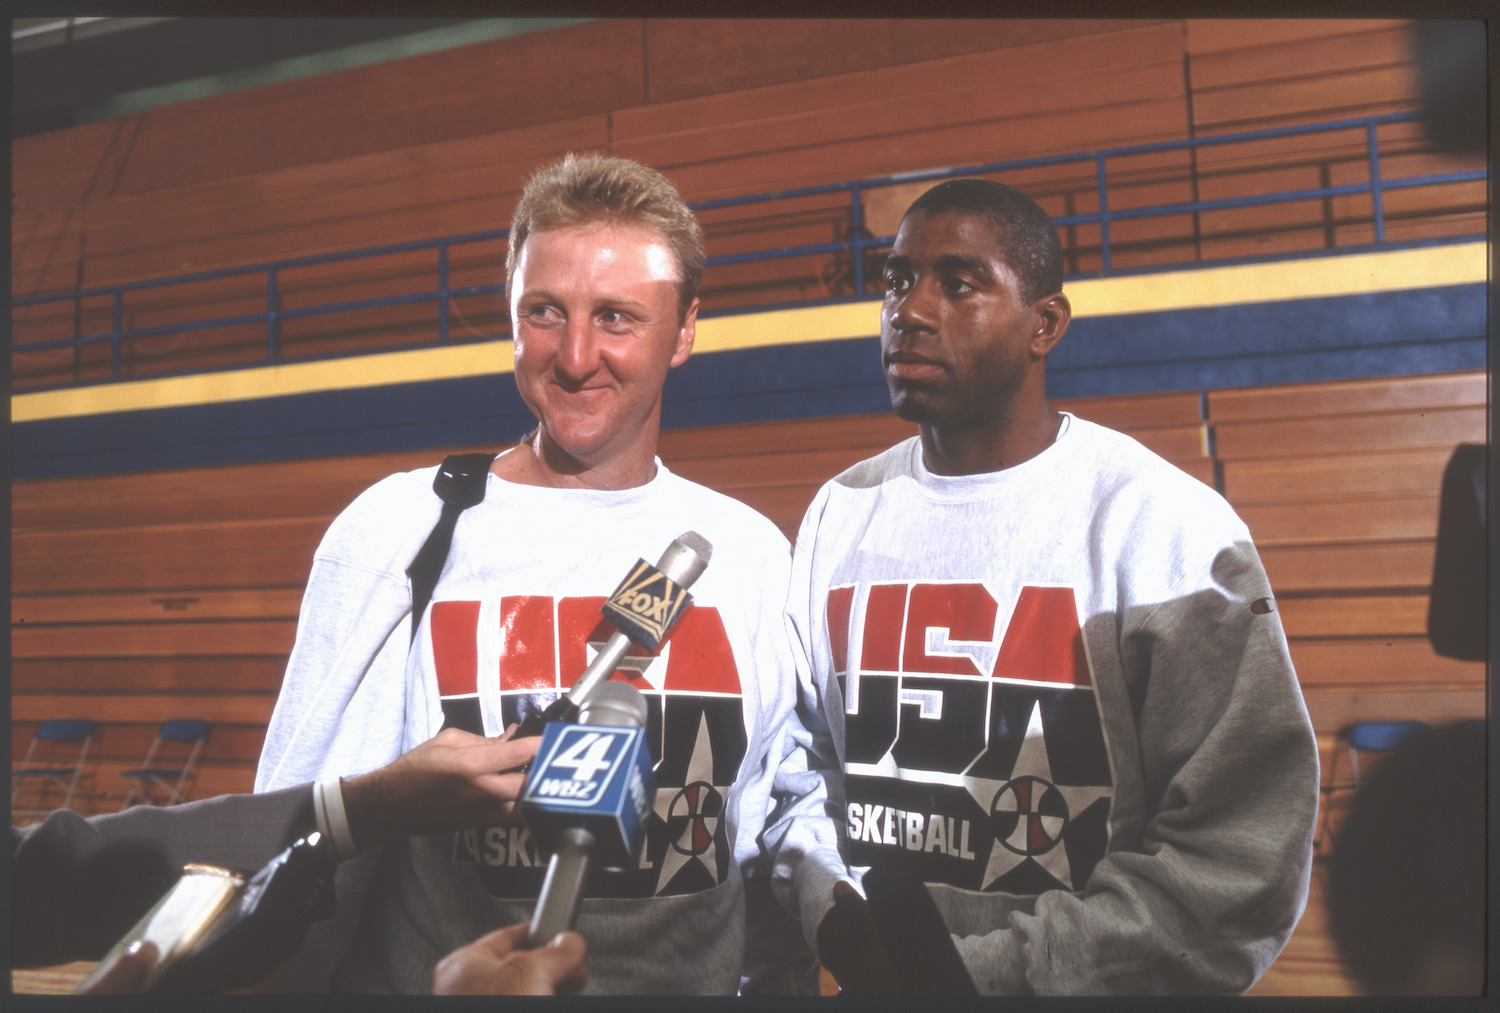 Dream Team co-captains Larry Bird (L) and Magic Johnson (R) meet with the media during the 1992 Olympics.